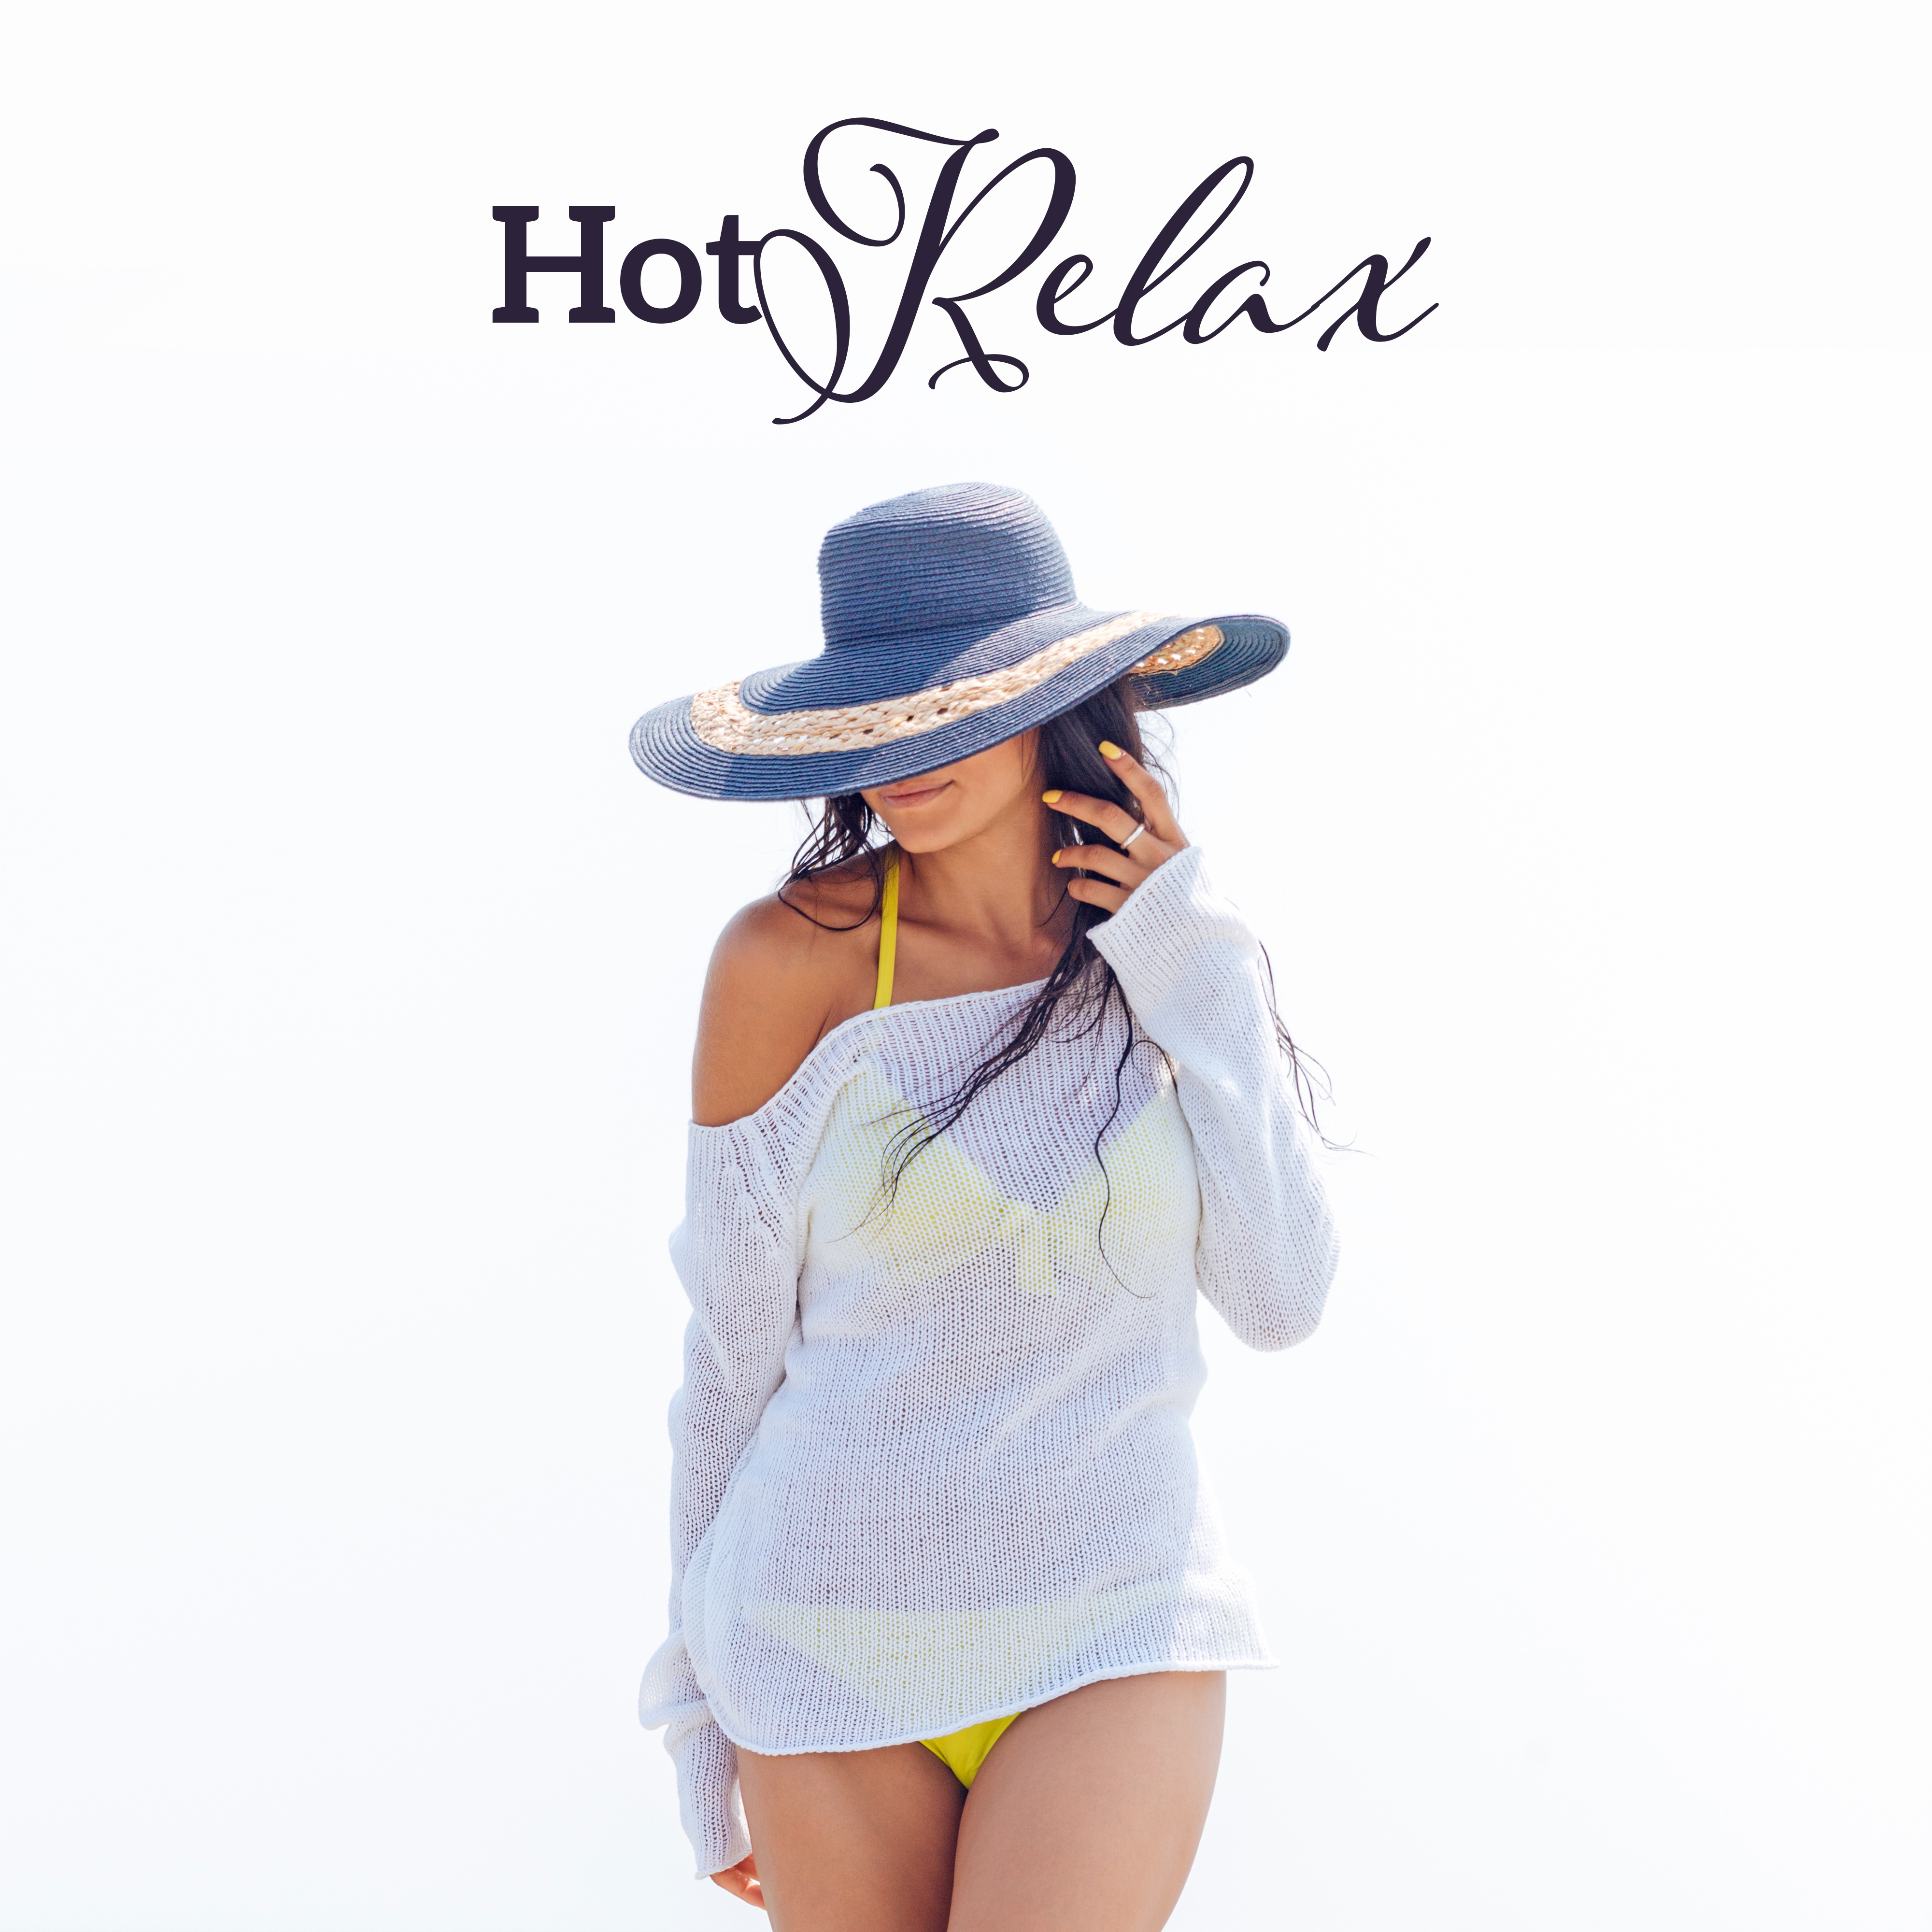 Hot Relax – Chill Out 2017, **** Beats, Beach Music, Passion Vibes